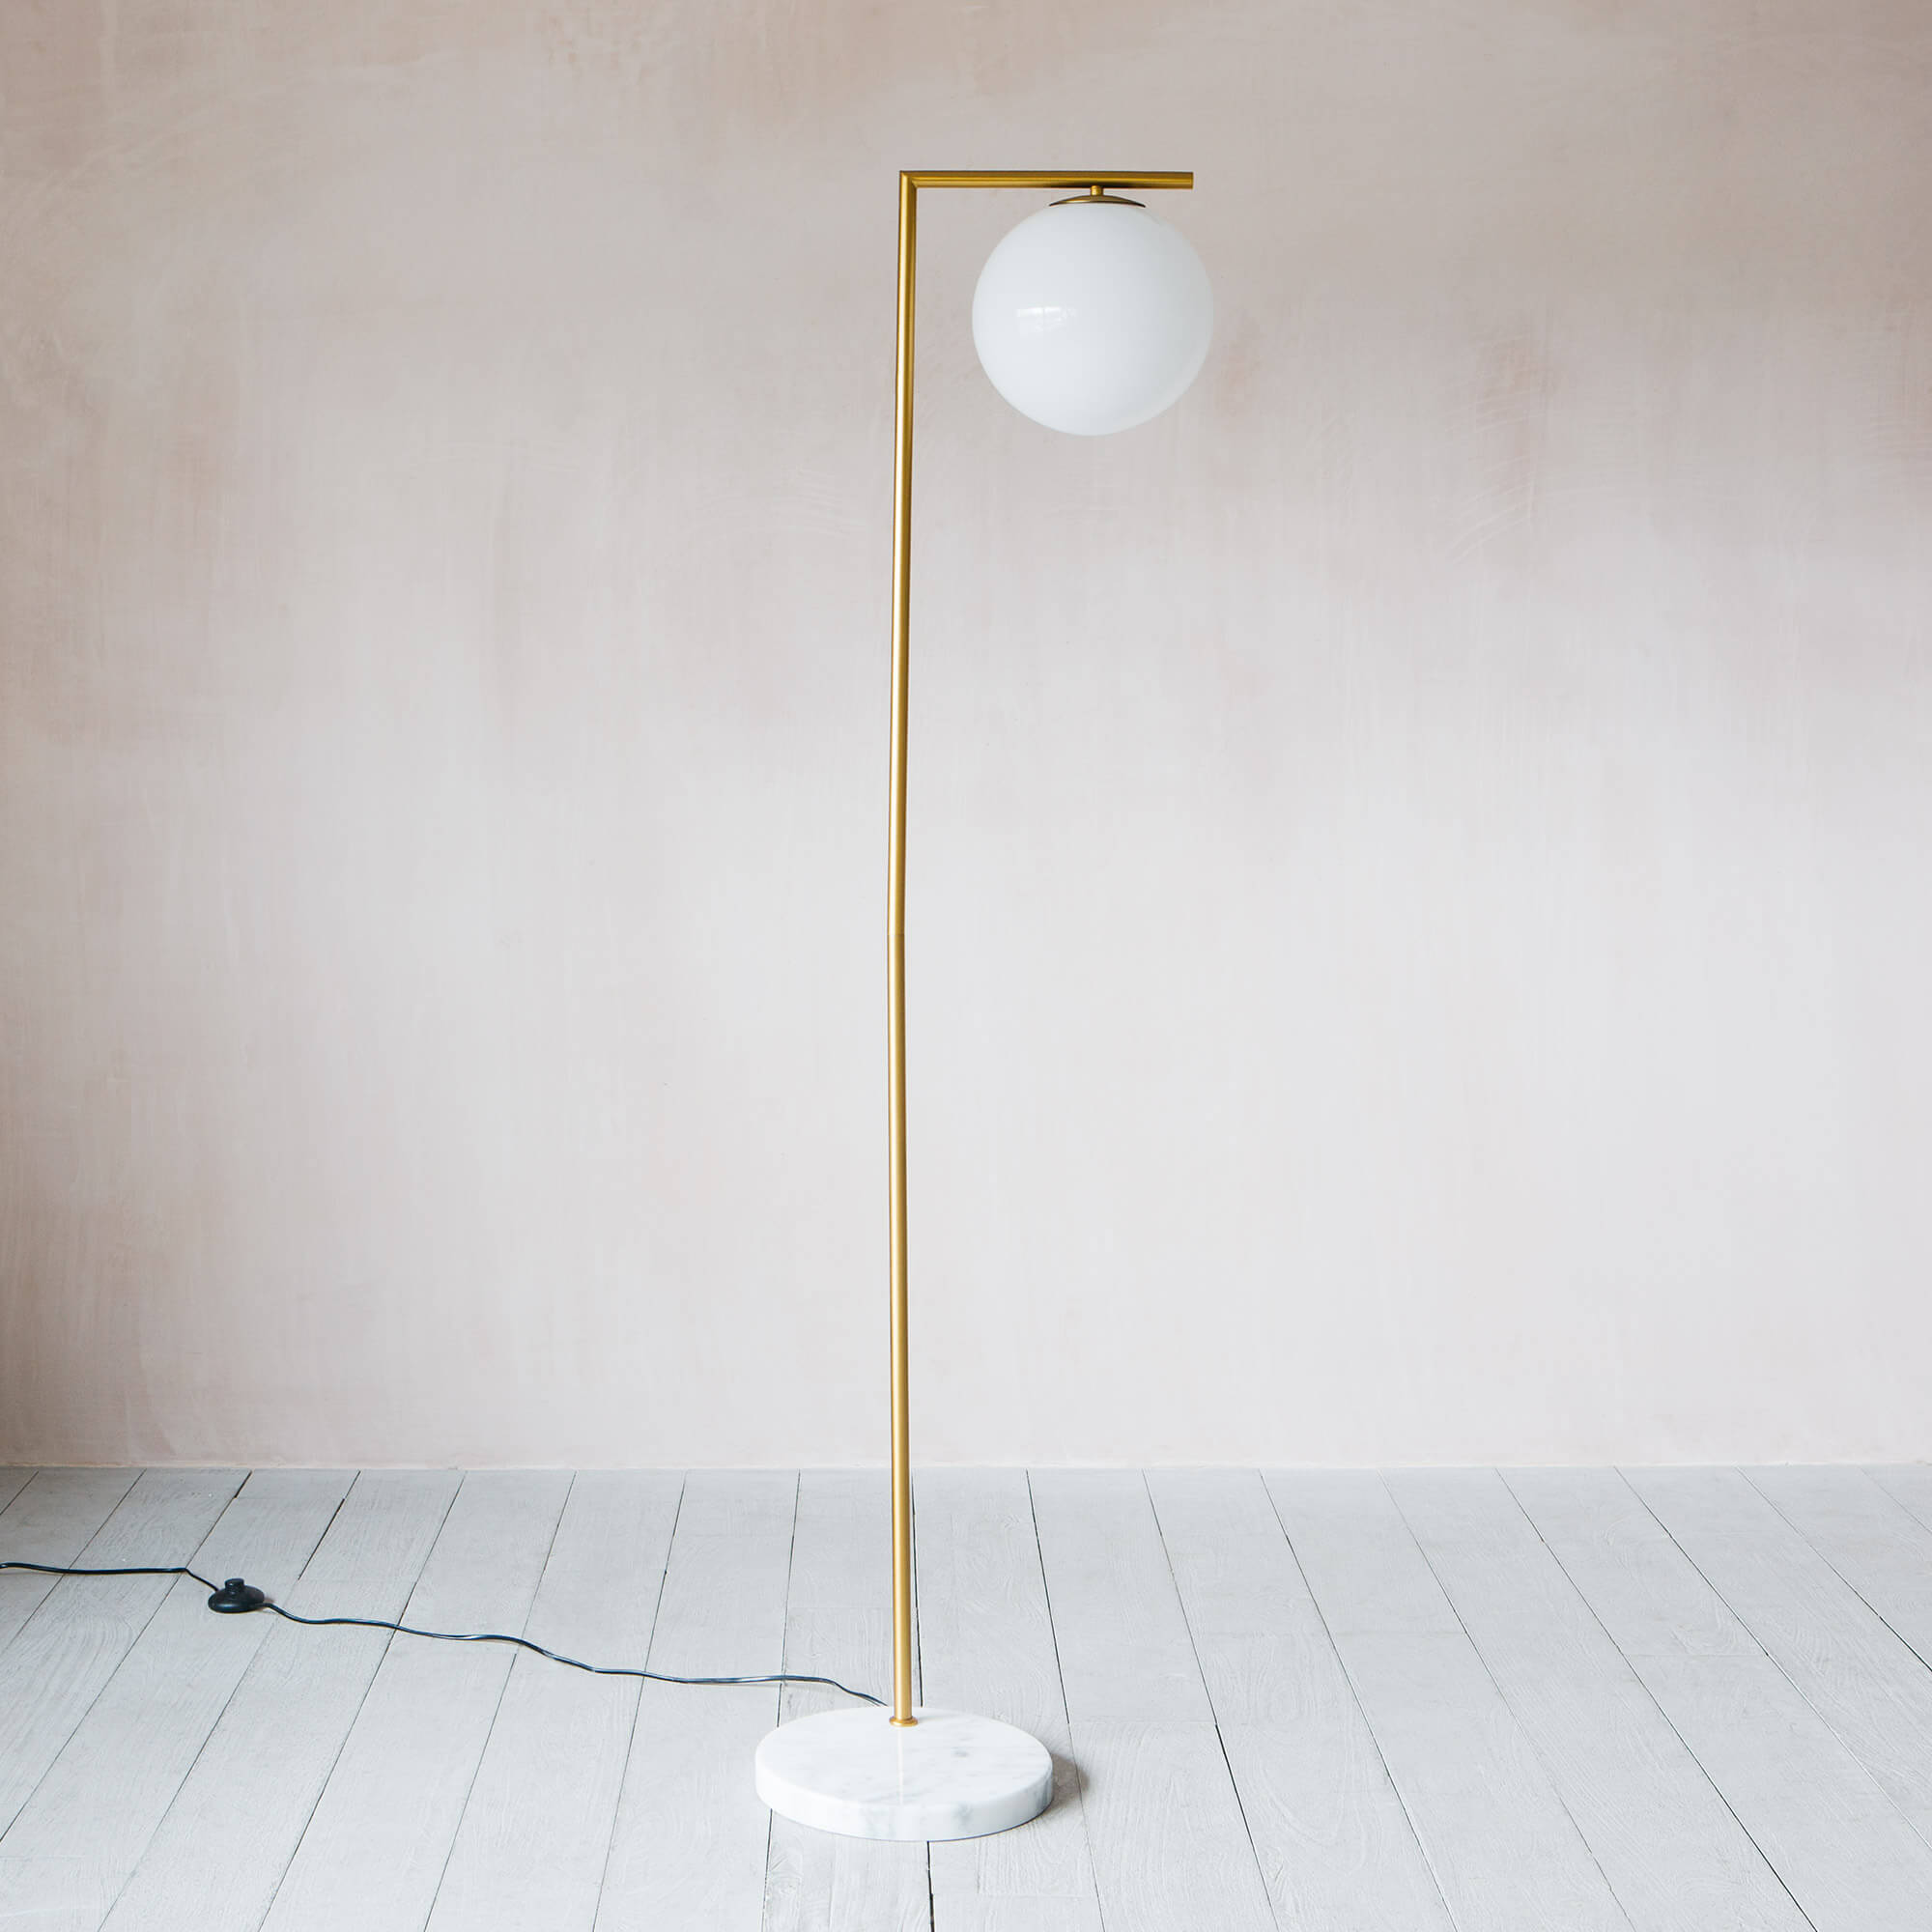 Read more about Graham and green cody globe floor lamp